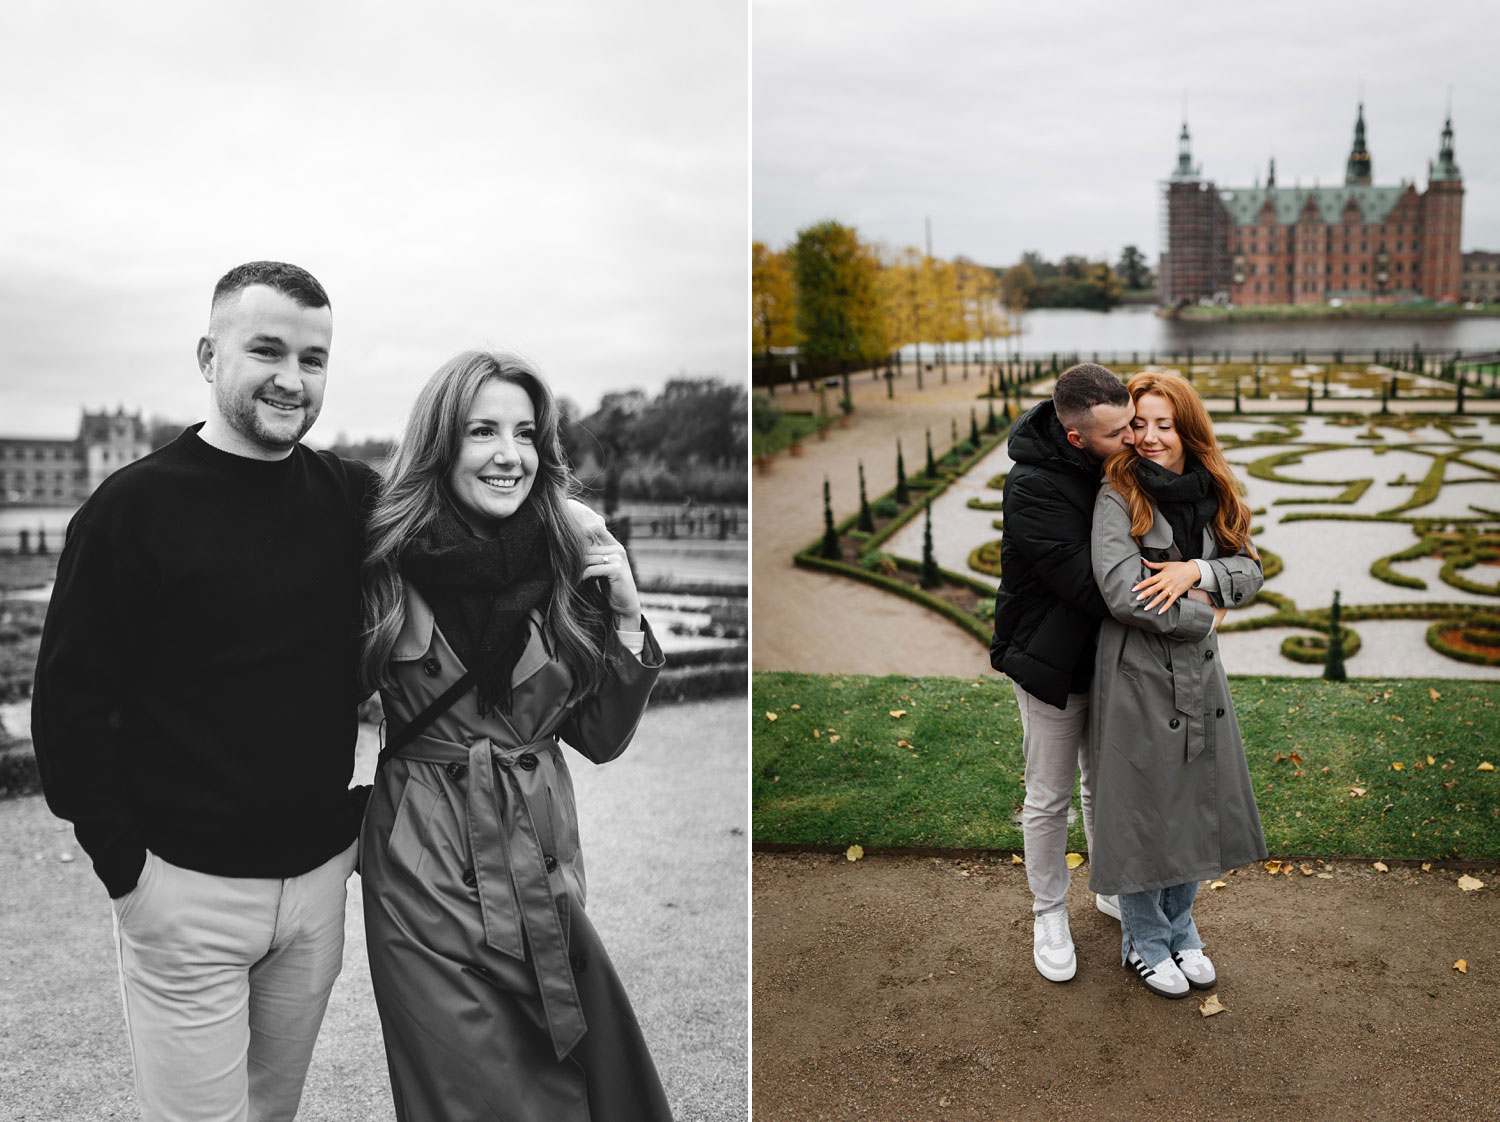 Intimate proposal session in Hillerød's castle gardens